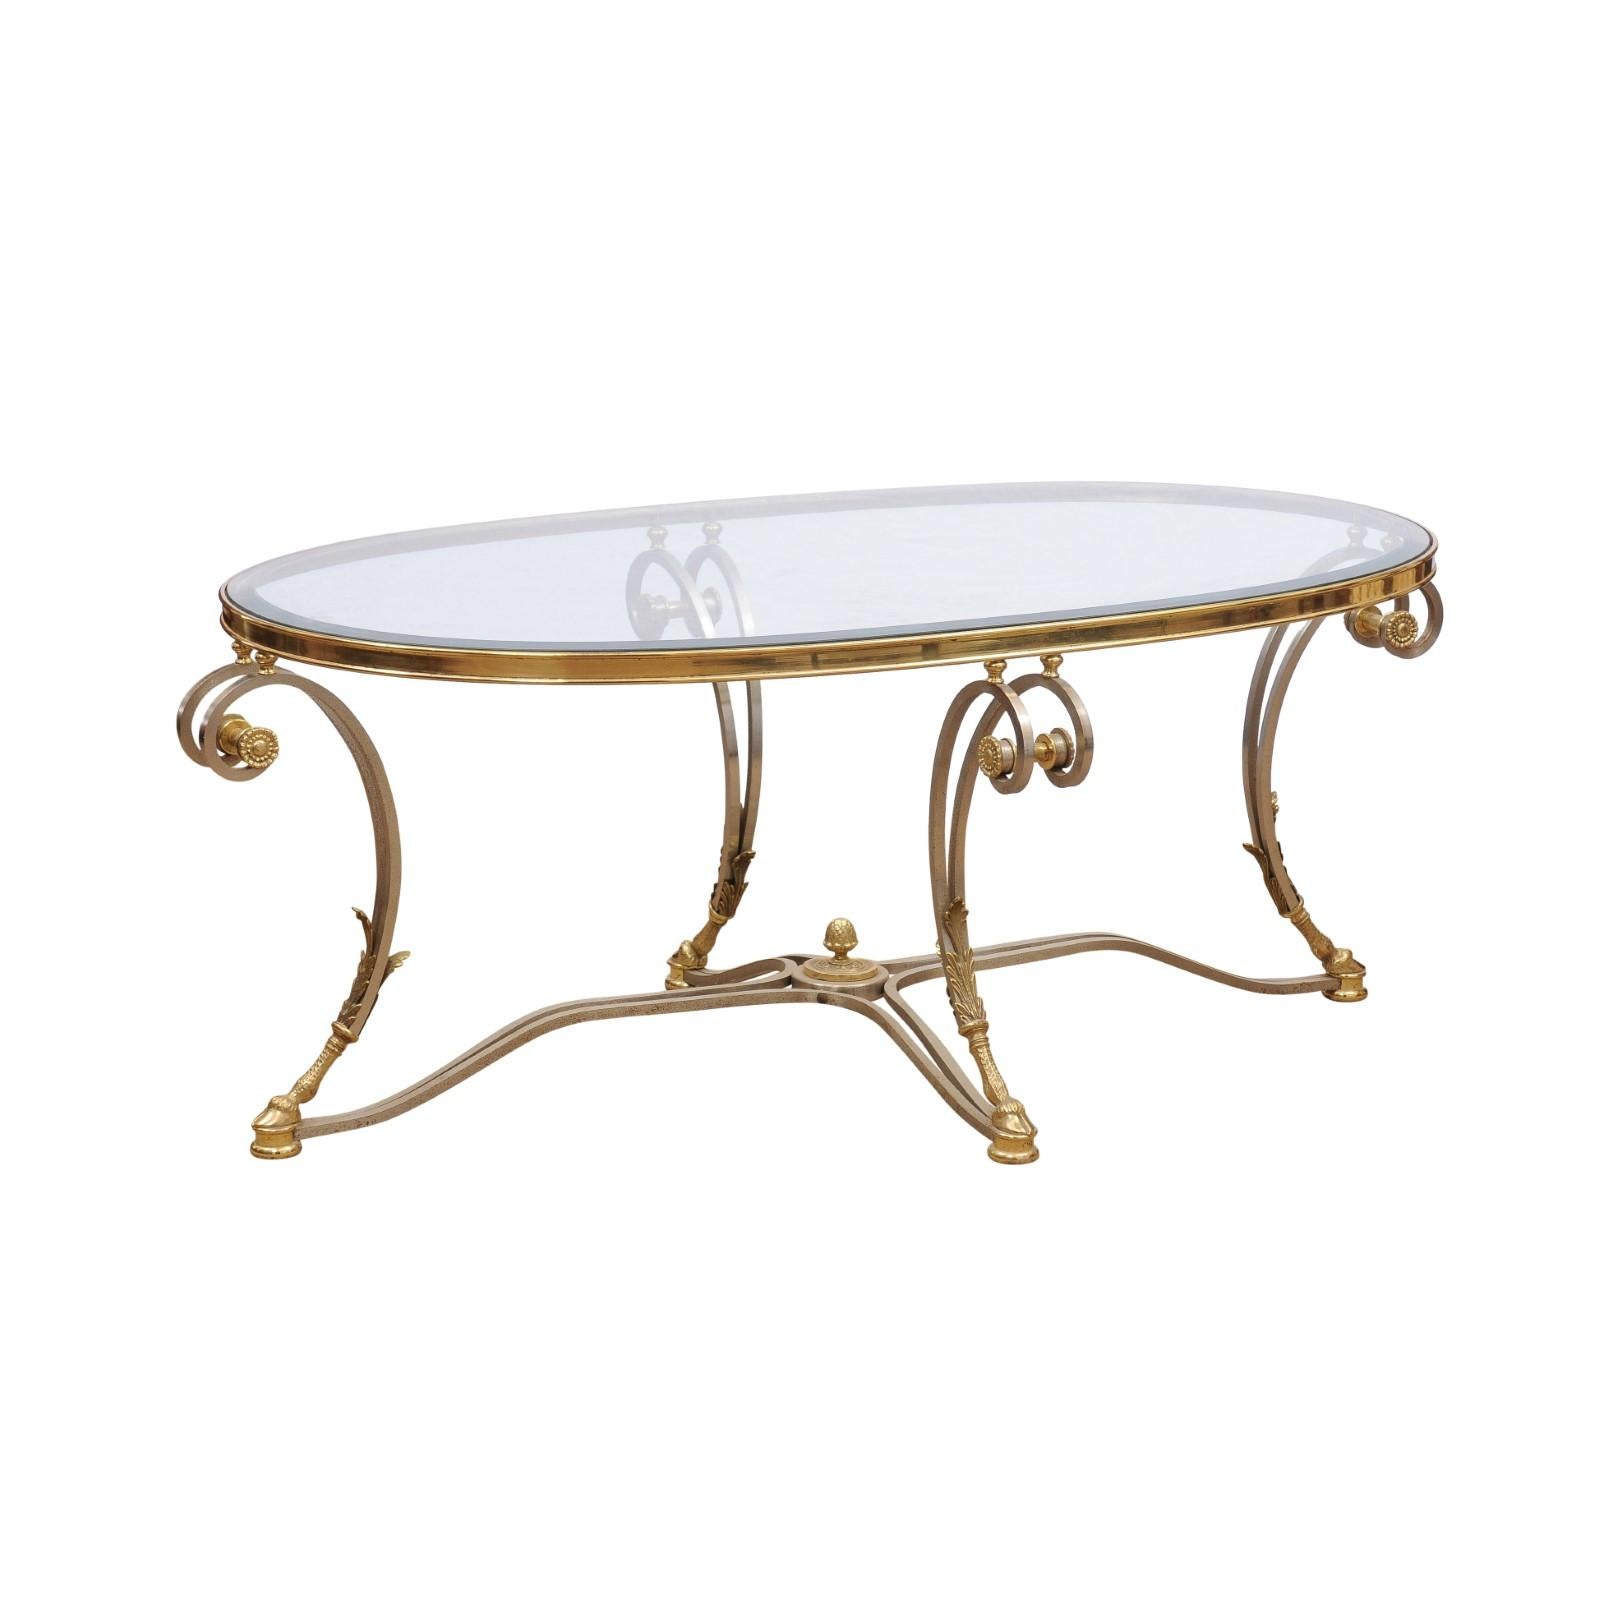 Oval French Steel & Brass Coffee Table with Glass Top, Hoof Feet & Acorn Detail, 20th Century